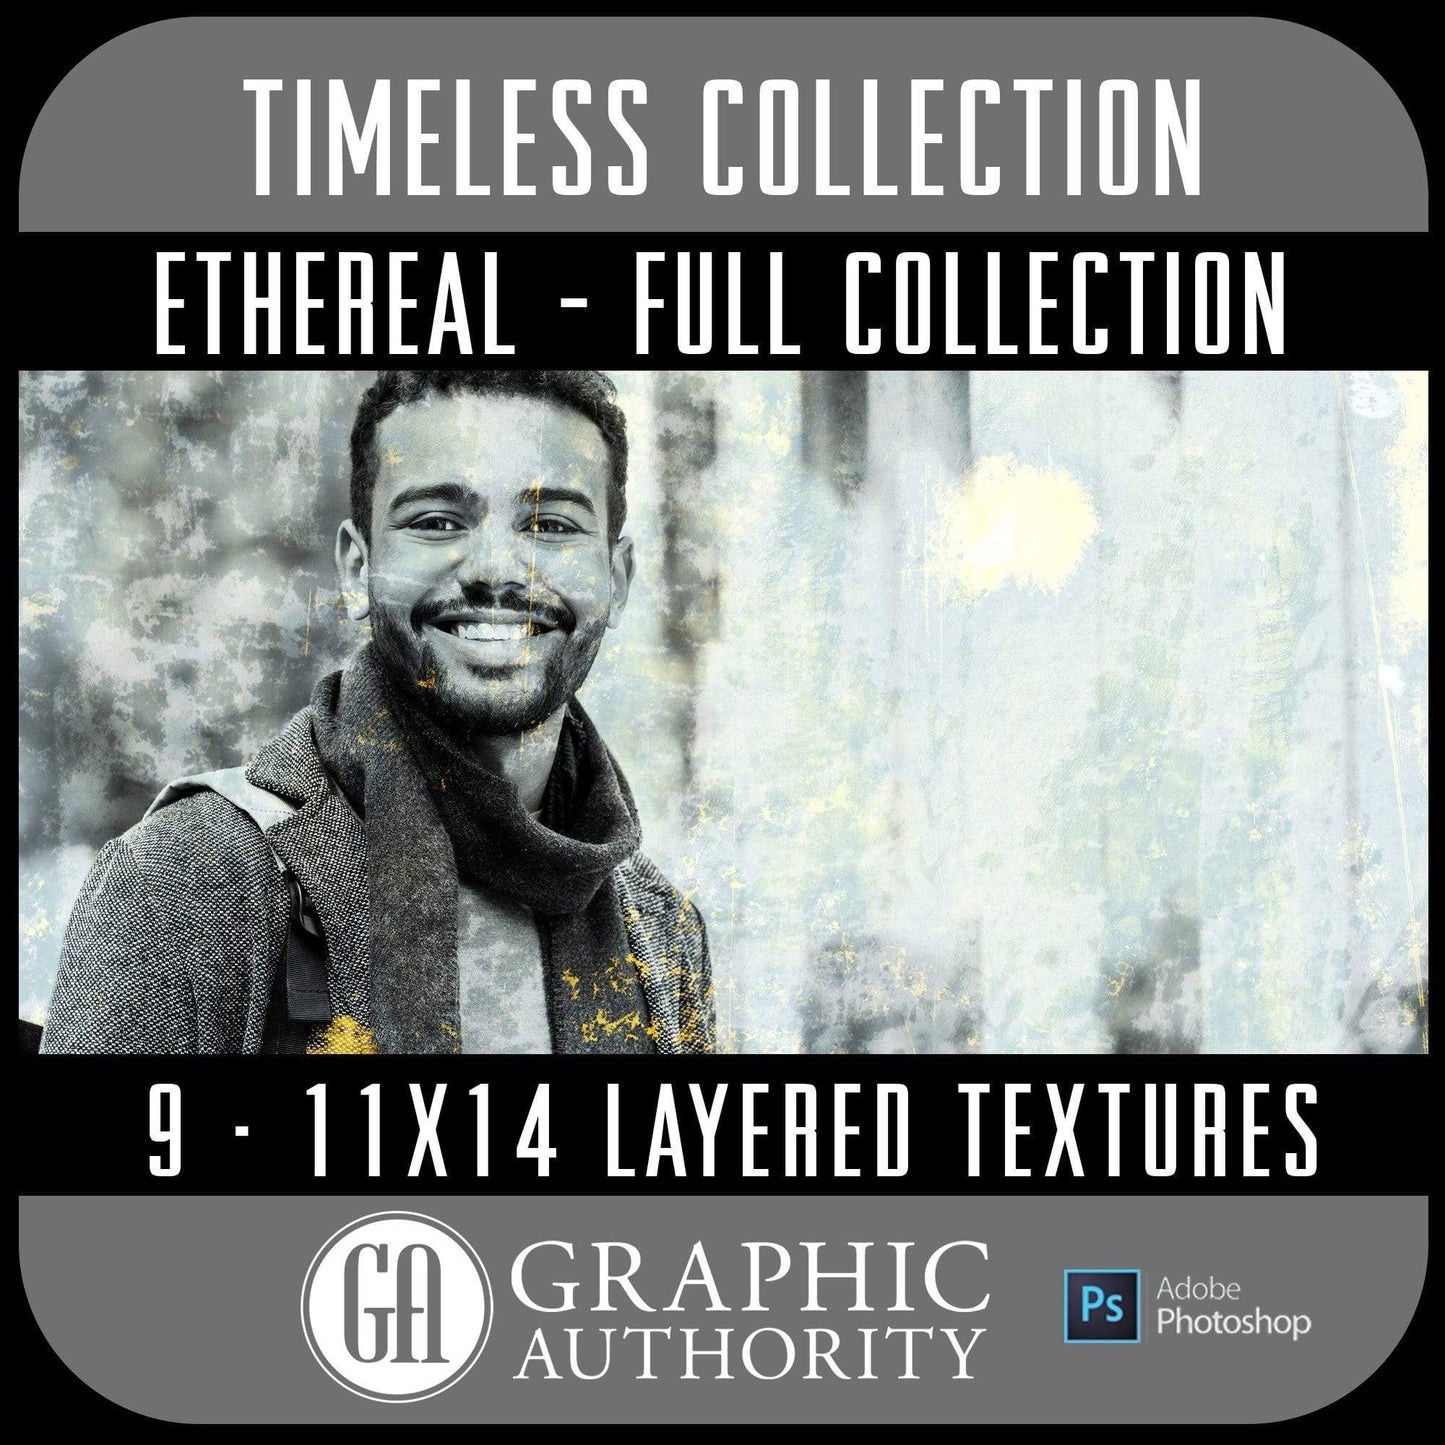 Timeless - Ethereal - Layered Textures - Full Collection-Photoshop Template - Graphic Authority